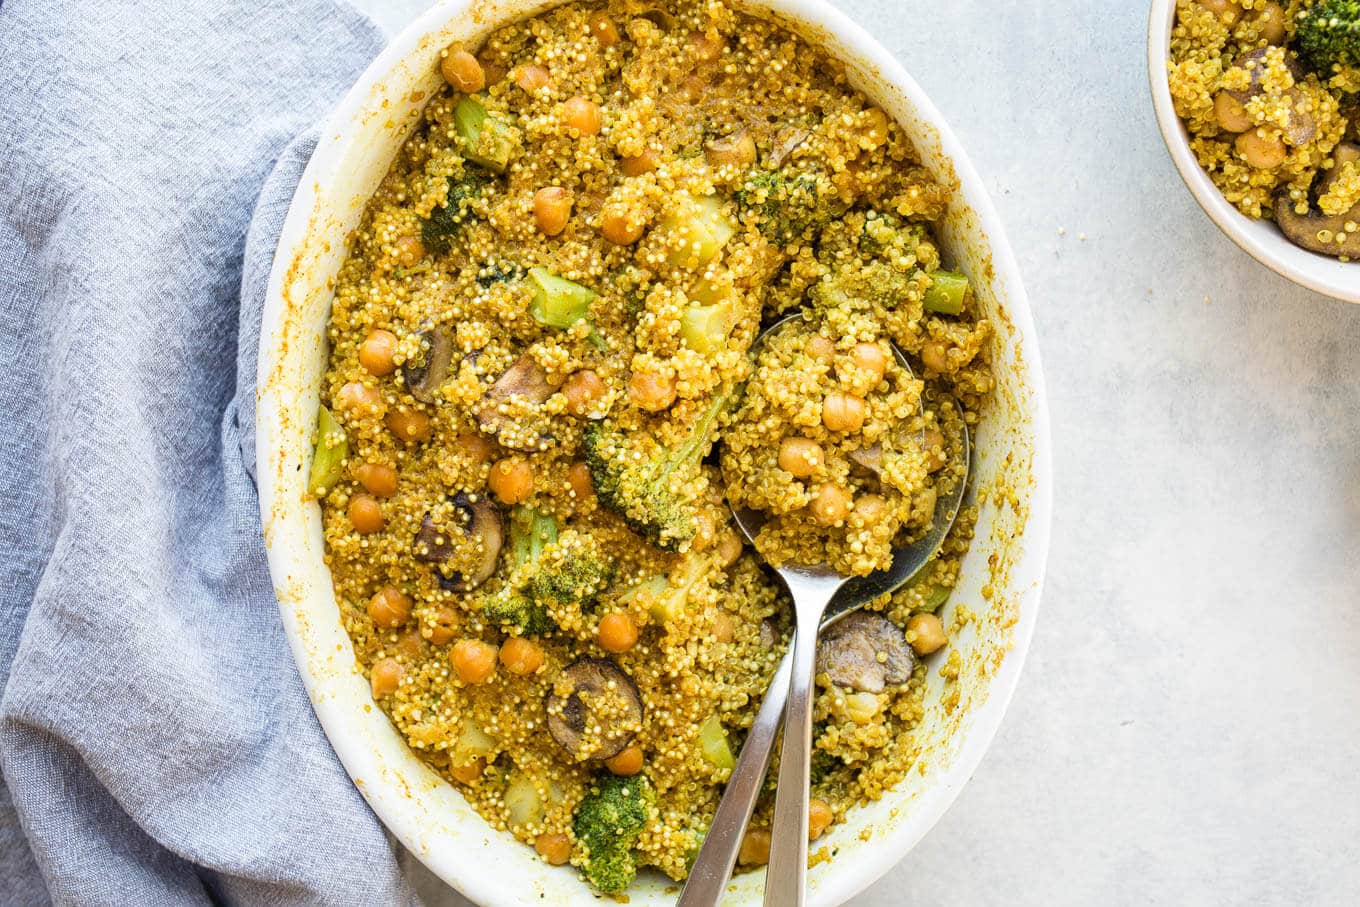 Curried Coconut Quinoa Bake makes for an easy, one-pot weeknight meal. Gluten-free, vegan.